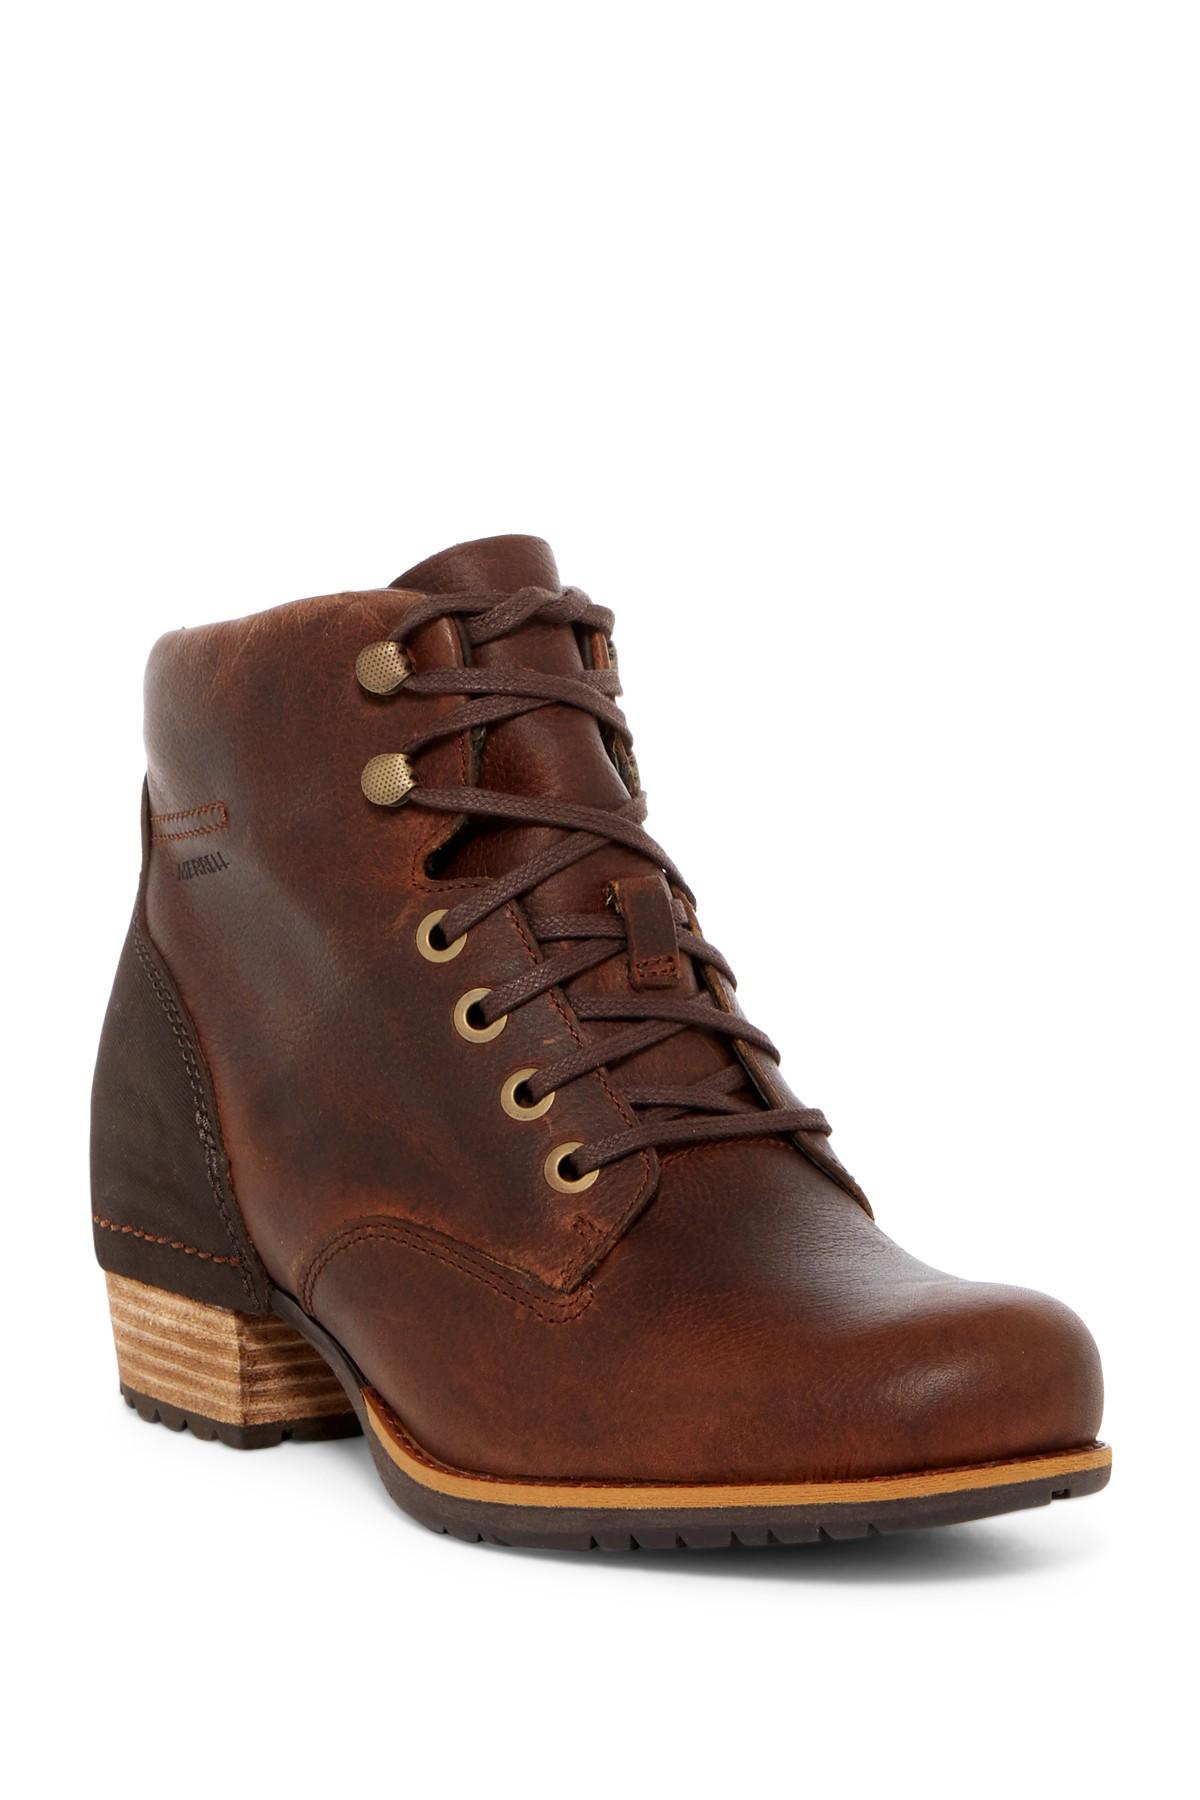 Merrell Shiloh Leather Lace-up Boot in Brown | Lyst